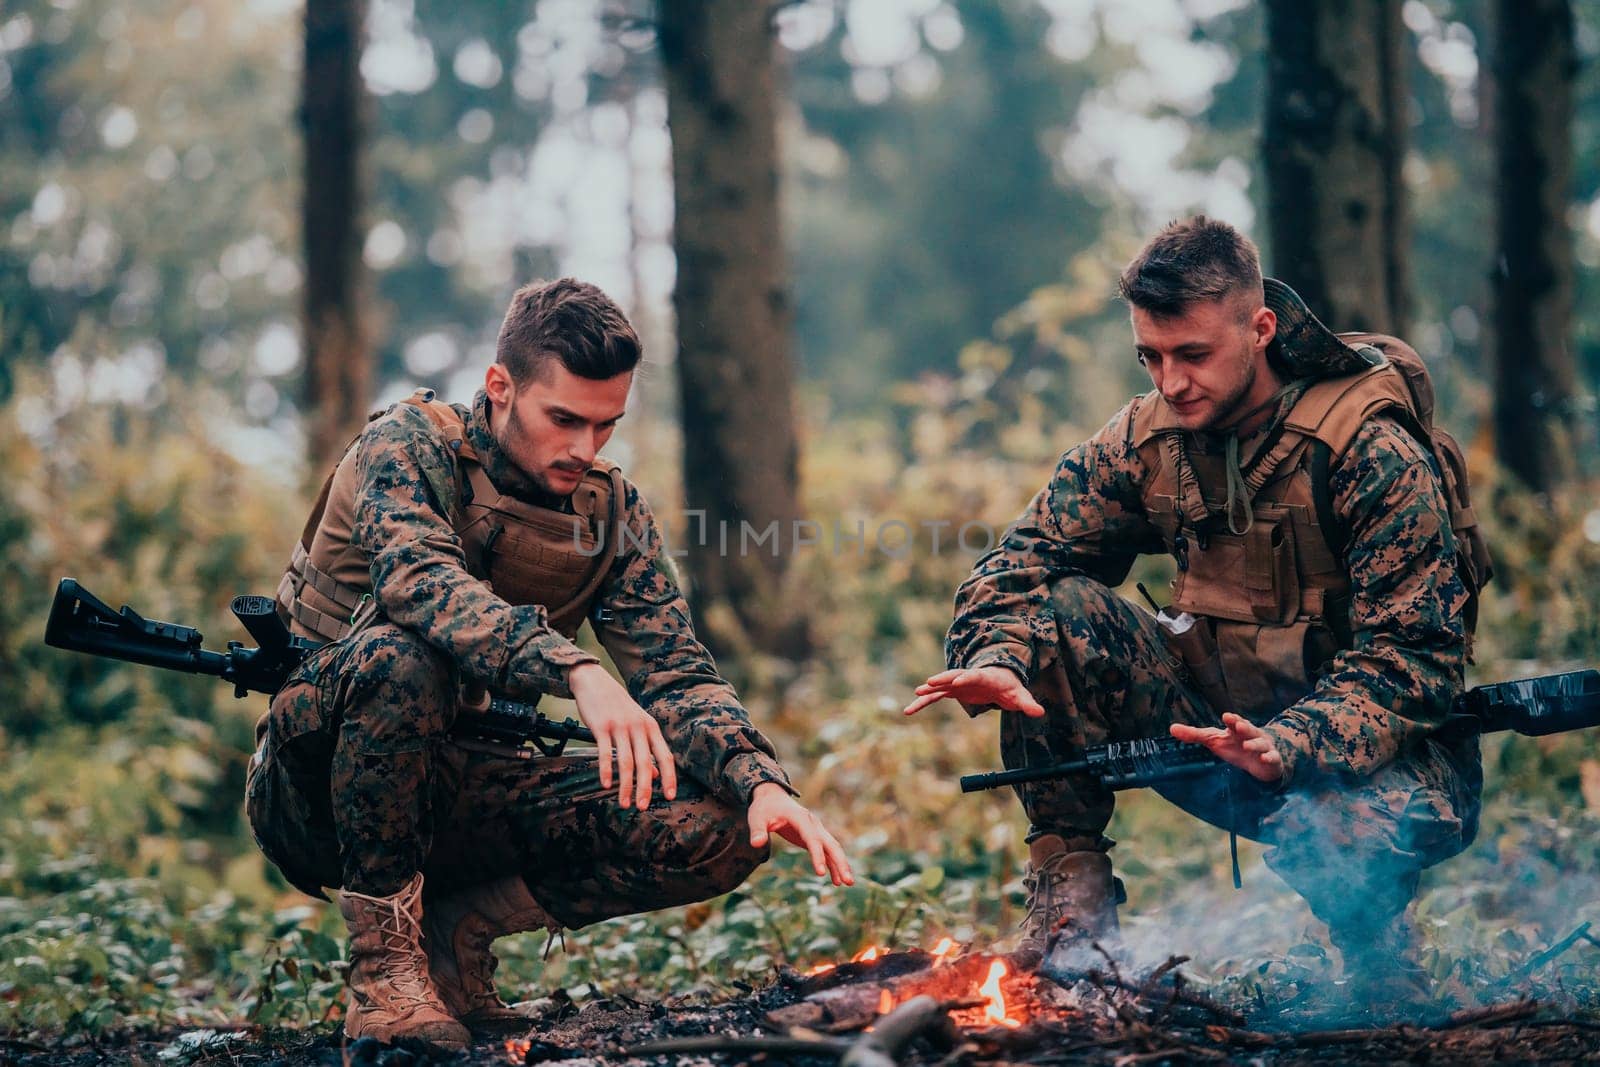 Two exhausted soldiers sitting by the fire after a weary and heavy war battle.